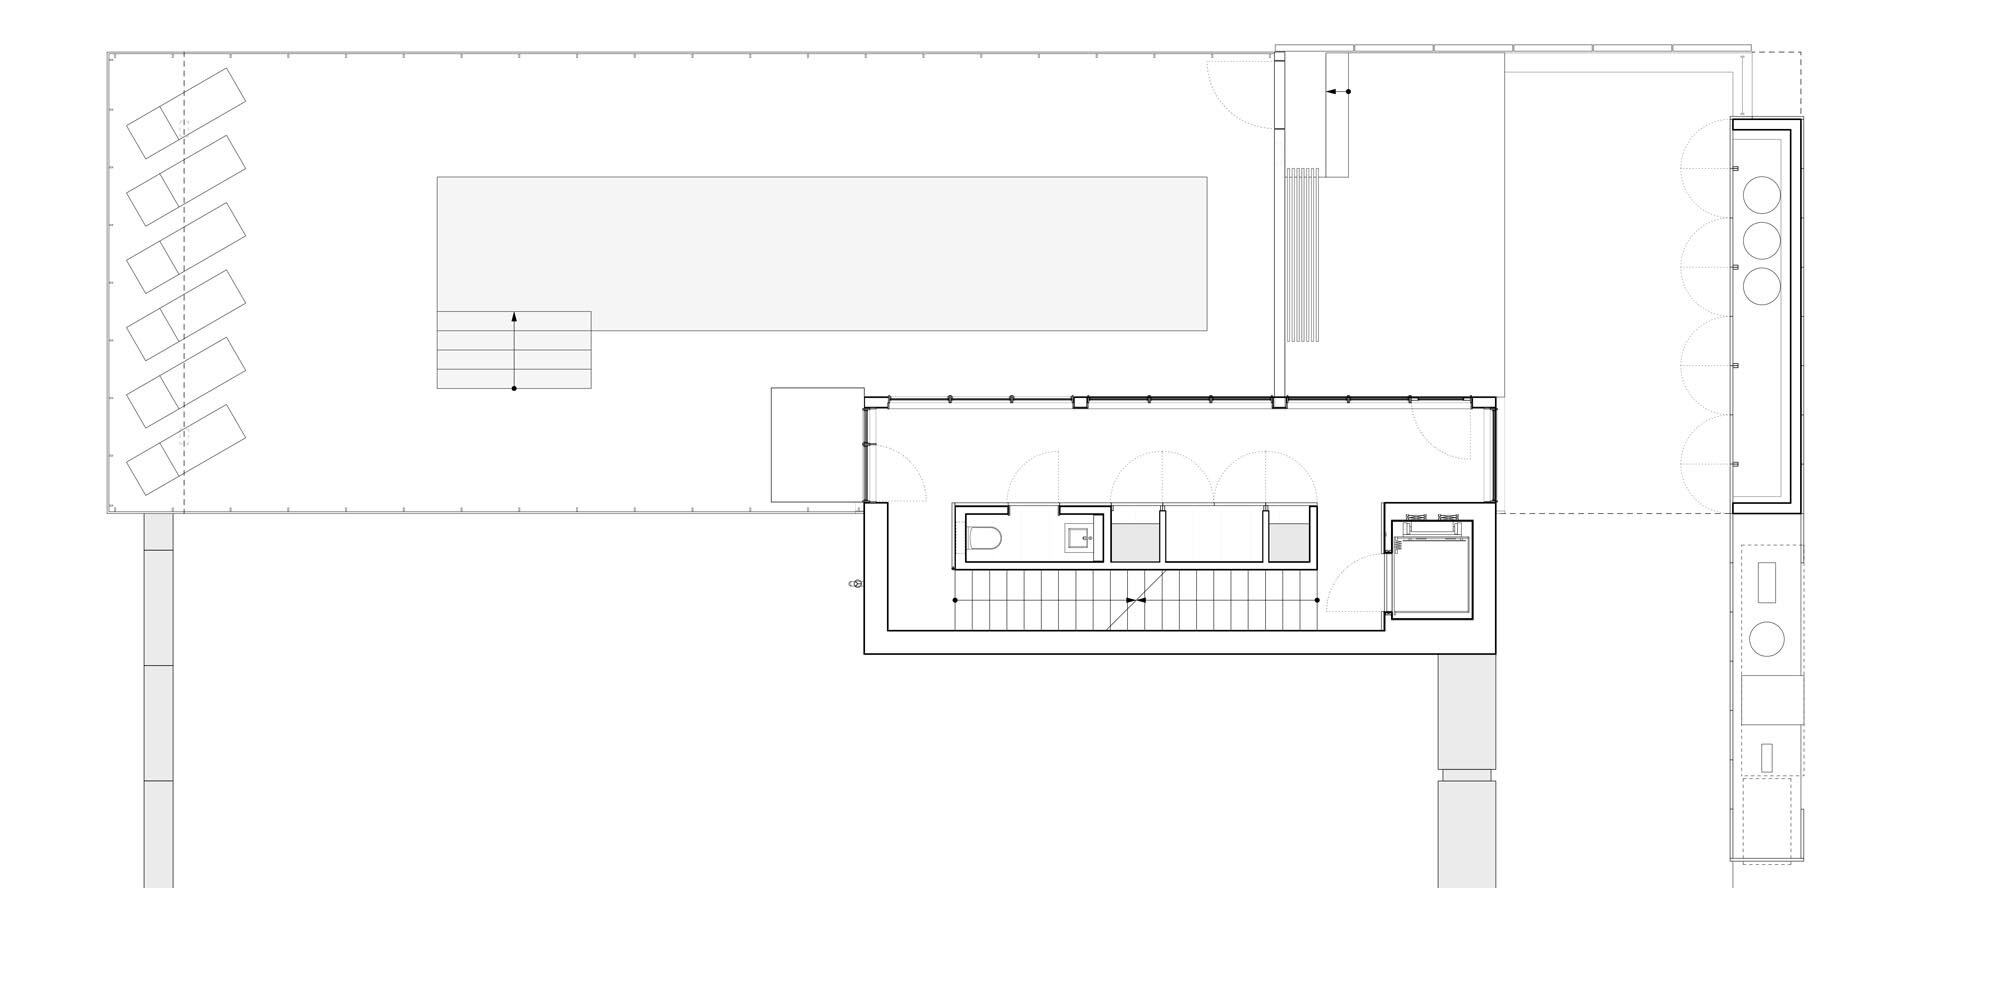 res4-resolution-4-architecture-modern-home-croton-on-hudson-river-house-ny-ground-floor-plan.jpg